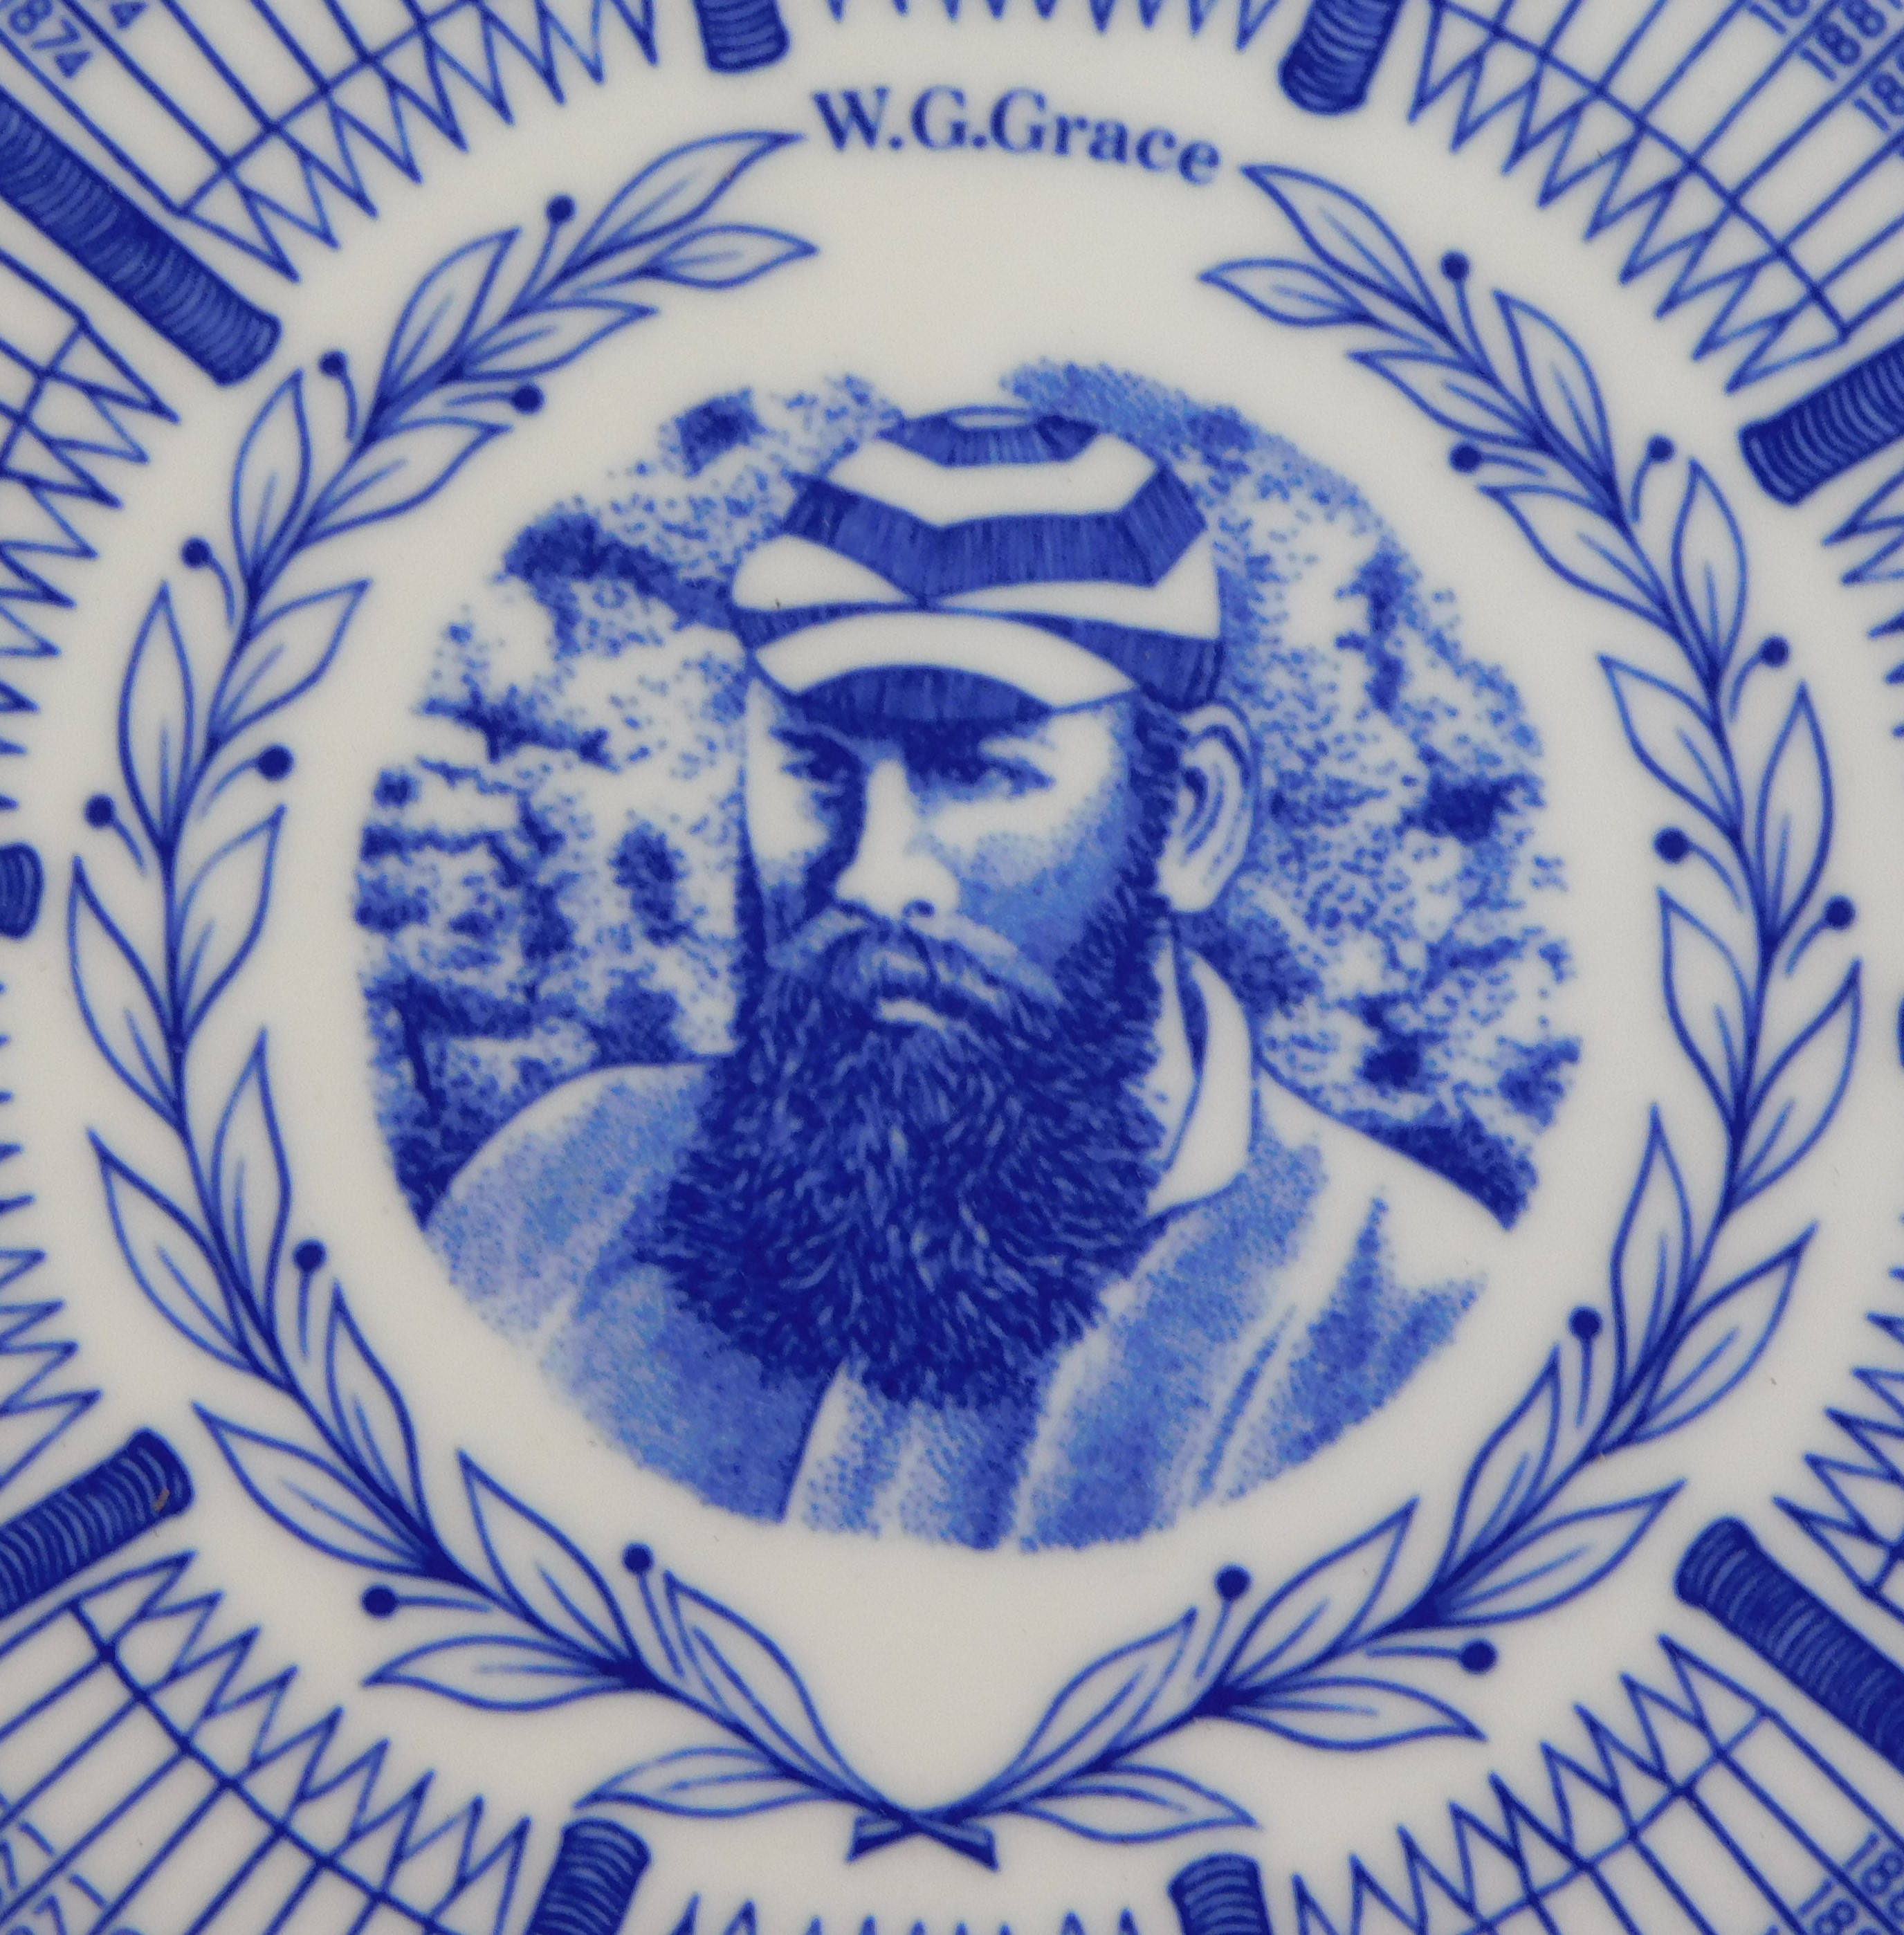 Cricket Dr. W.G. Grace 'Century of Centuries' Coalport 9" plate with certificate. Very fine - Image 4 of 5